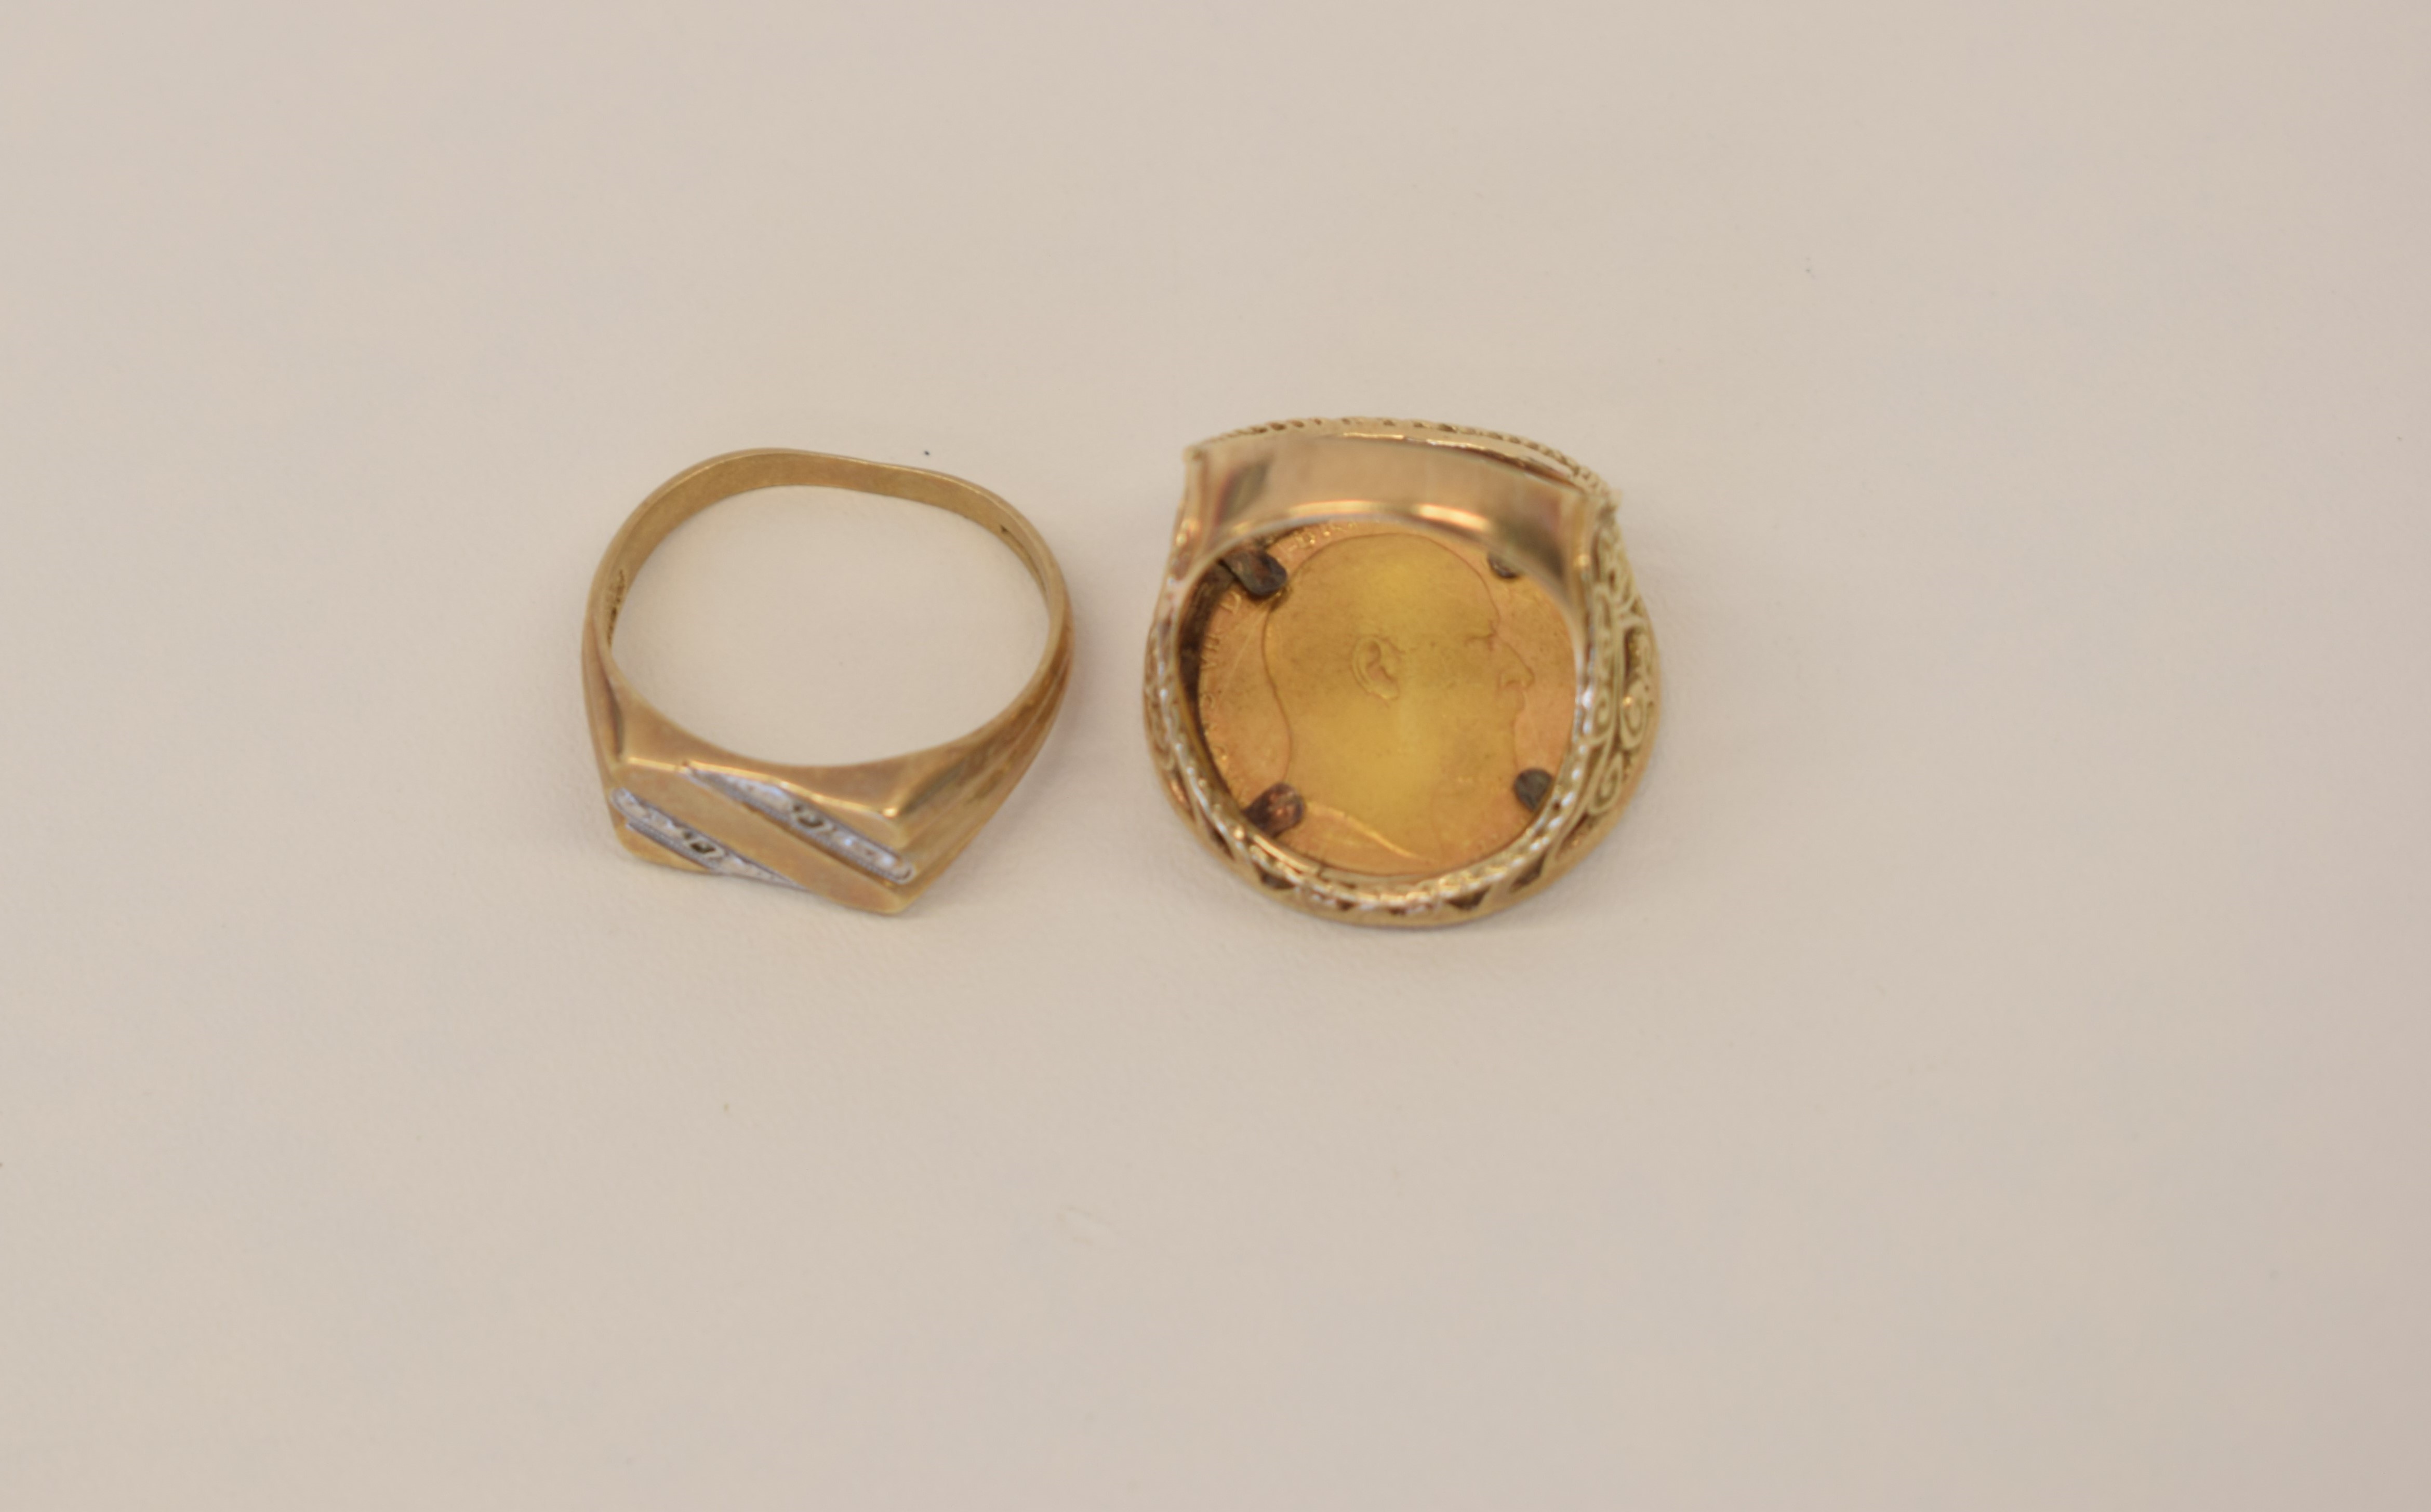 Miscellaneous 22ct yellow gold hallmarked coin and Gents 9ct yellow gold hallmarked ring - Image 2 of 2